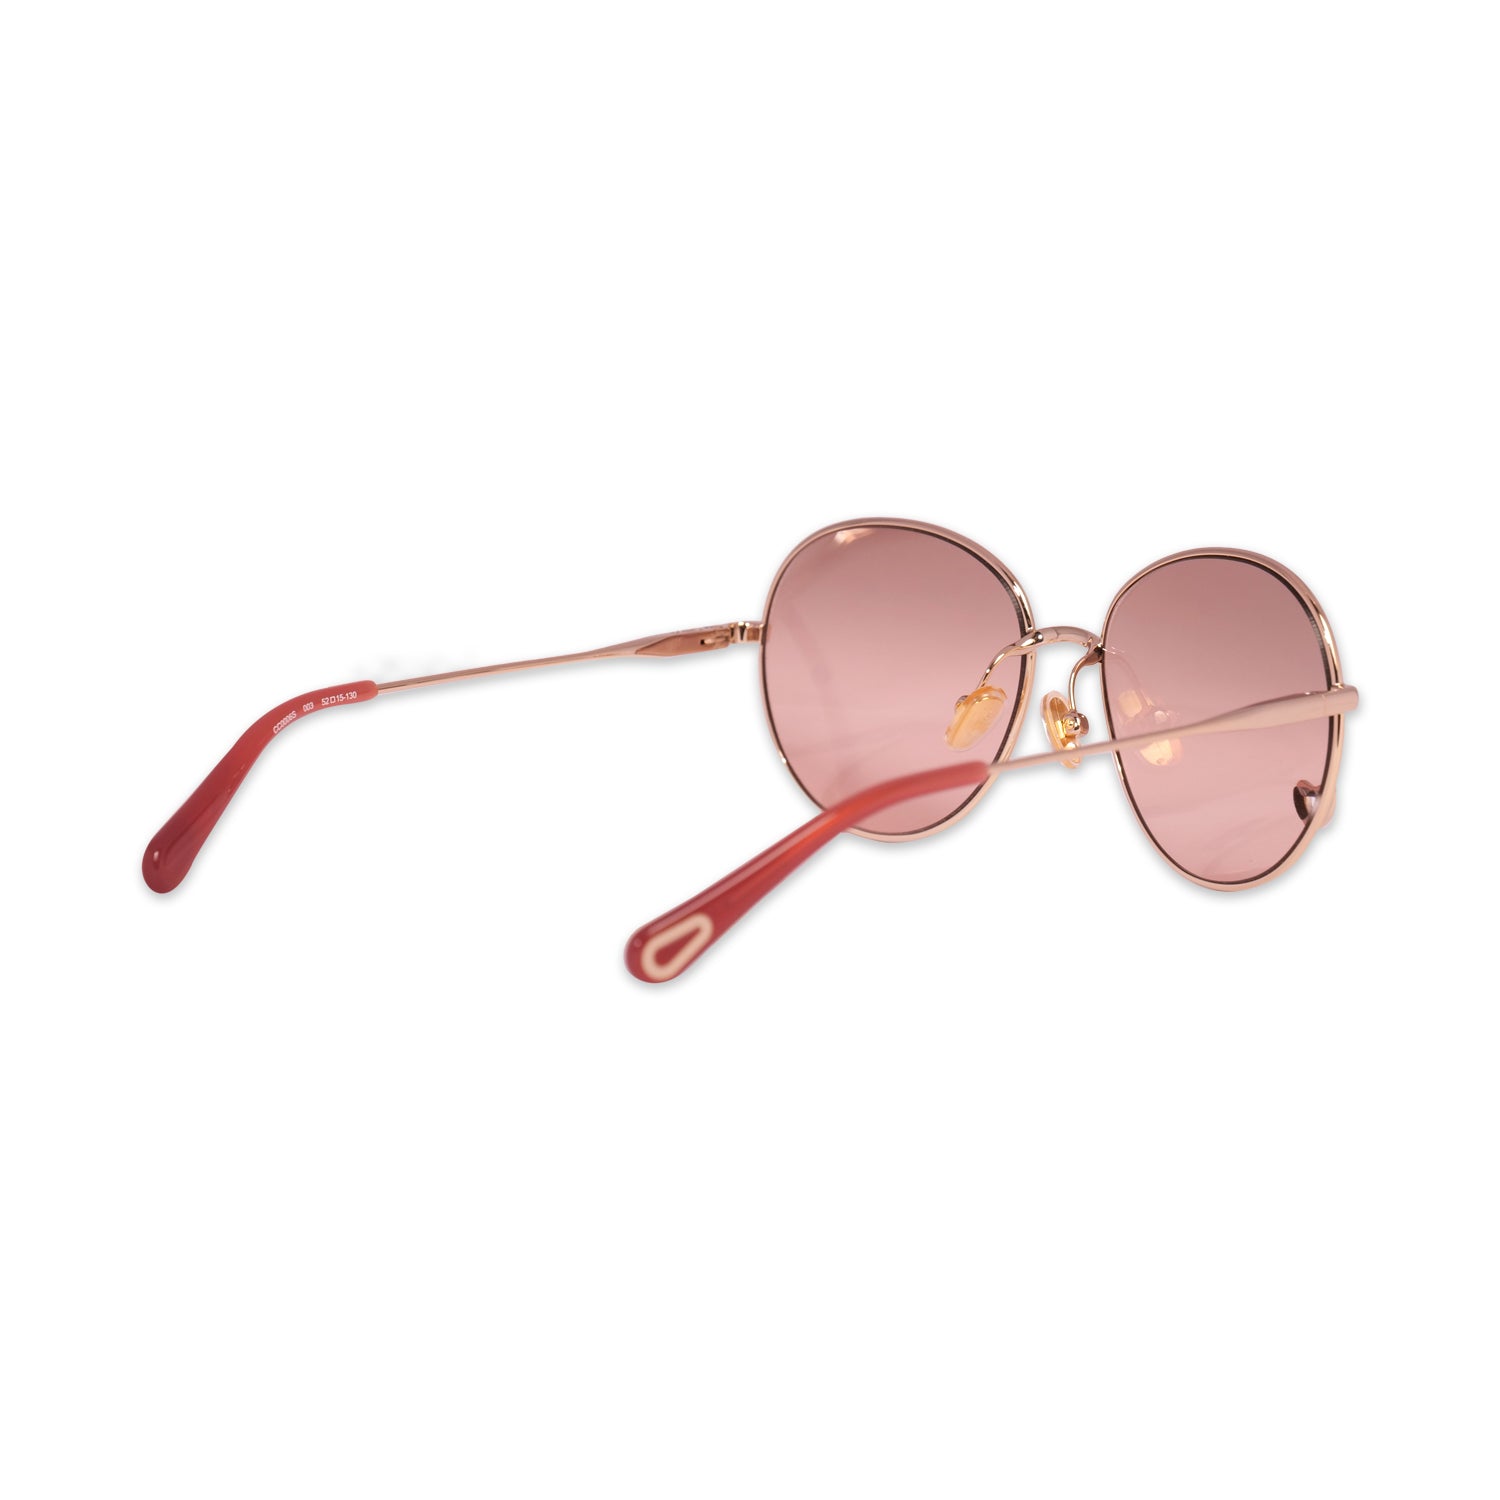 CHLOE SUNGLASSES IN GOLD-PINK